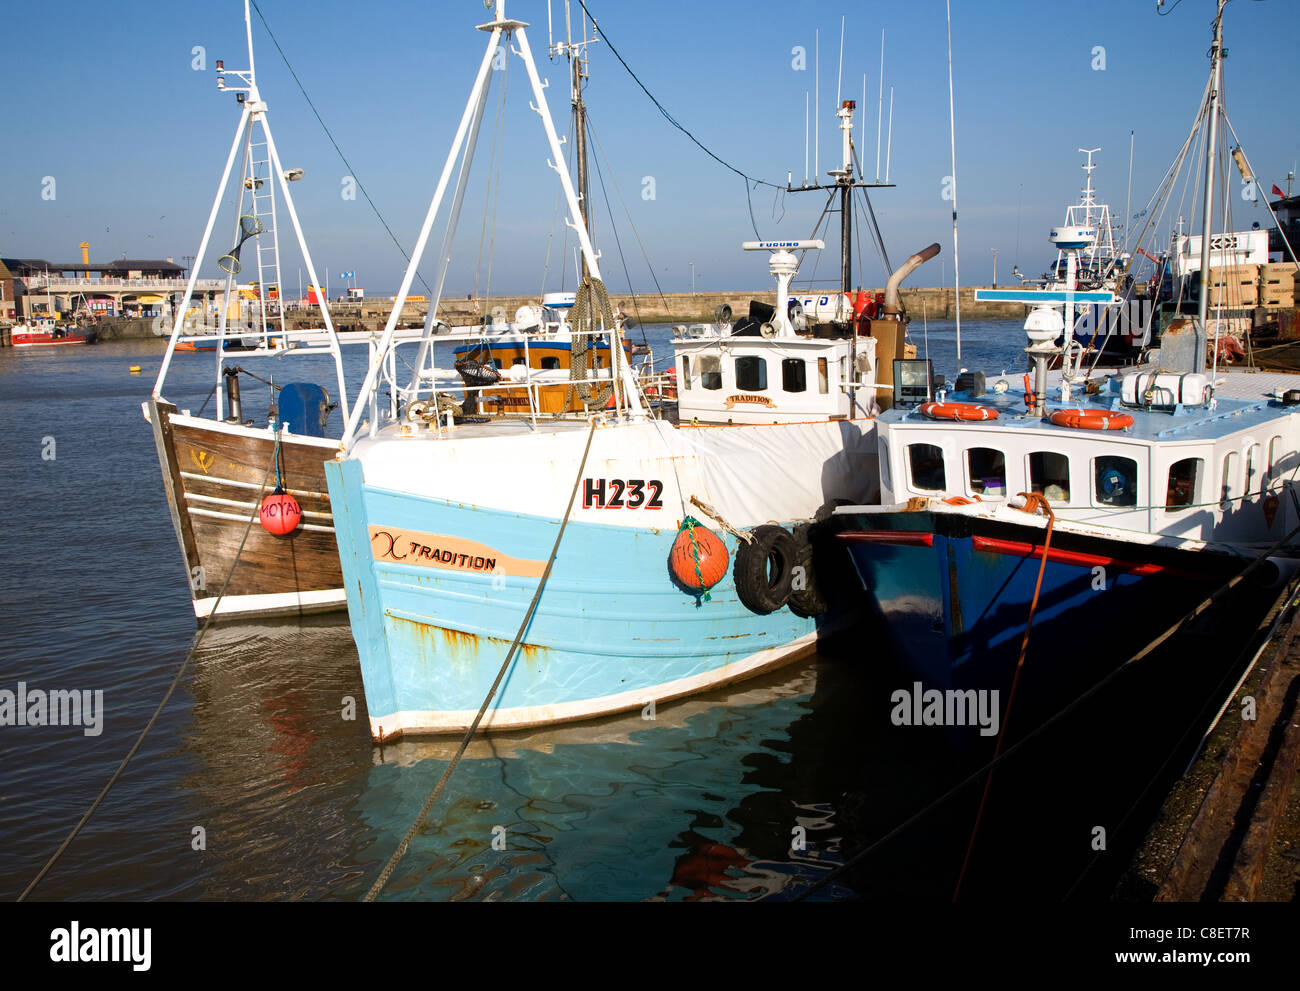 Boats in the harbour at Bridlington, Yorkshire, England Stock Photo